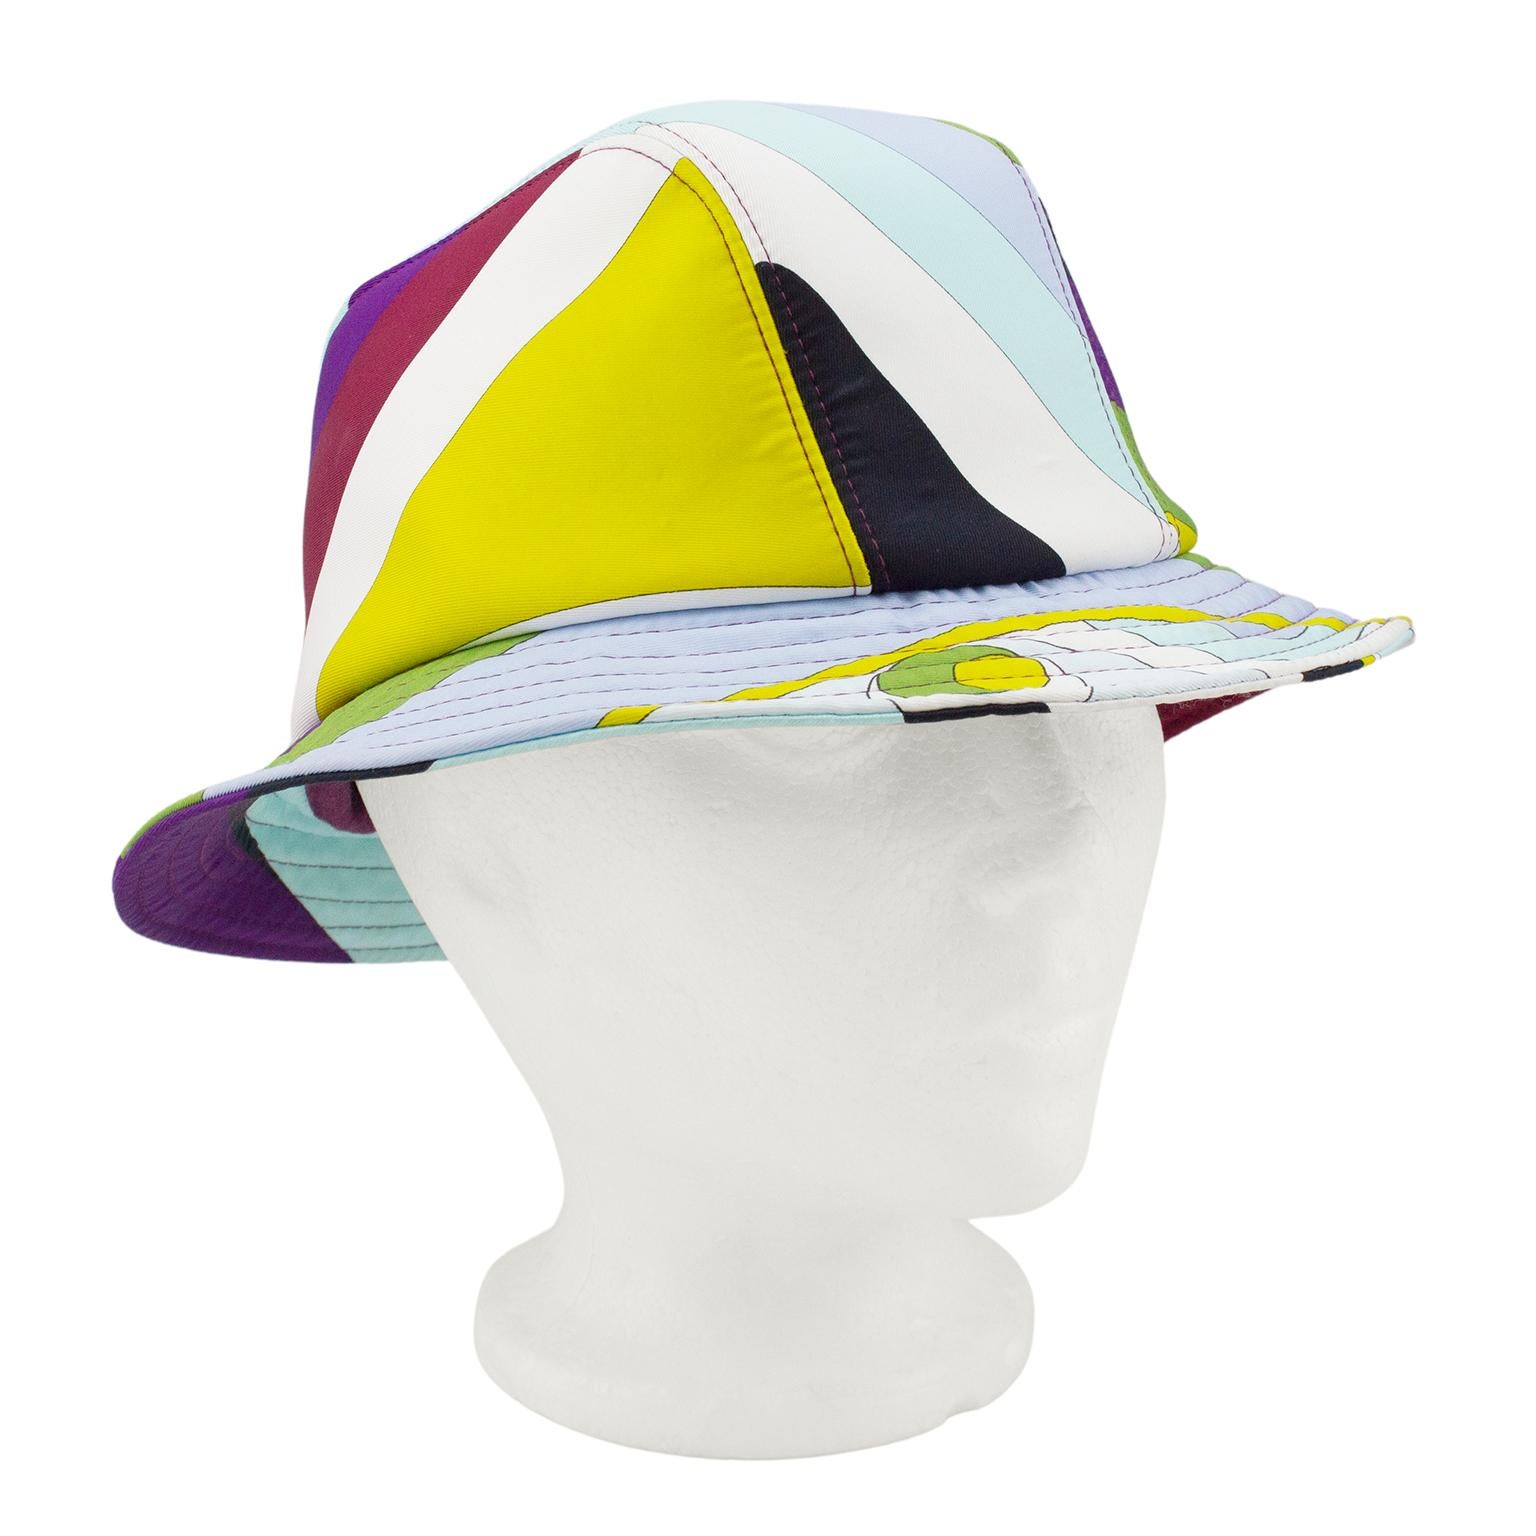 Emilio Pucci neoprene bucket hat from the 2000's. Iconic multicolour abstract Pucci print with markings. Maroon interior & top stitching. Excellent vintage condition - small, faint mark on front. 21.5